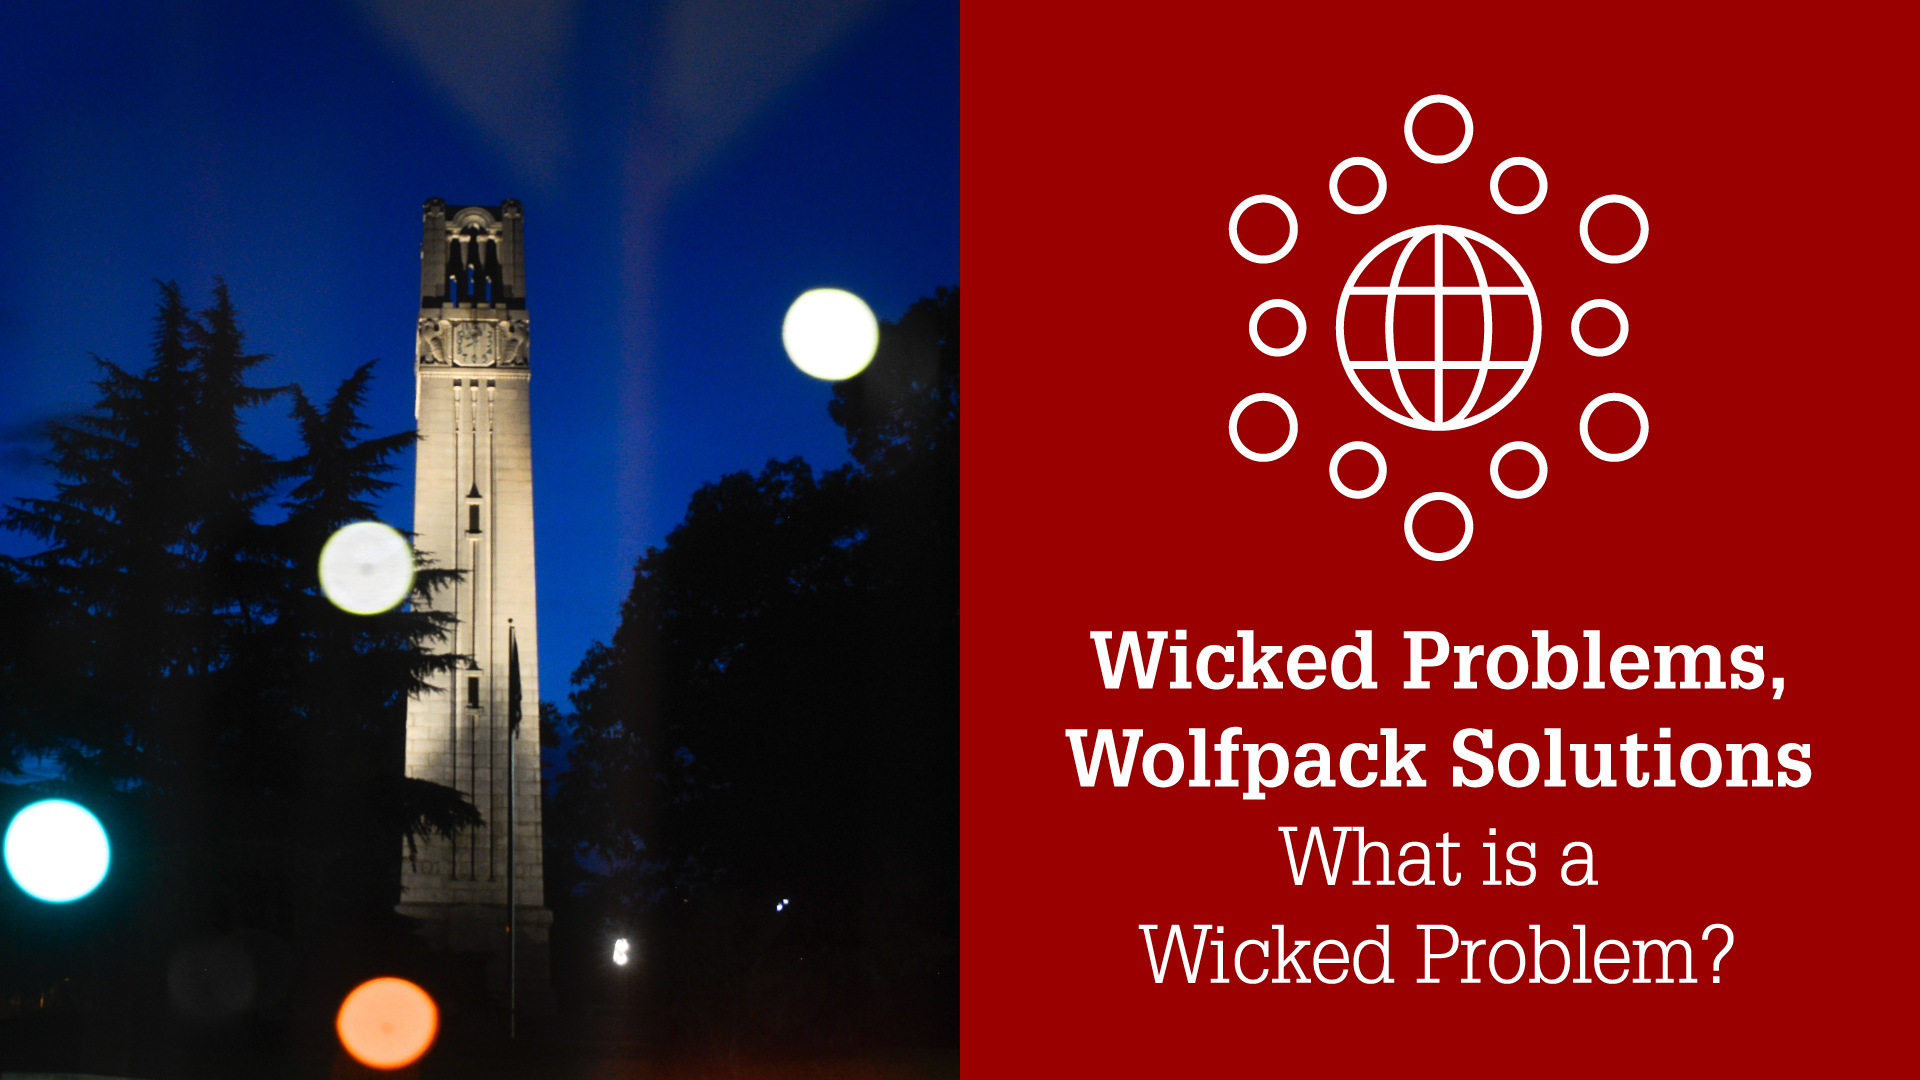 What is a Wicked Problem?